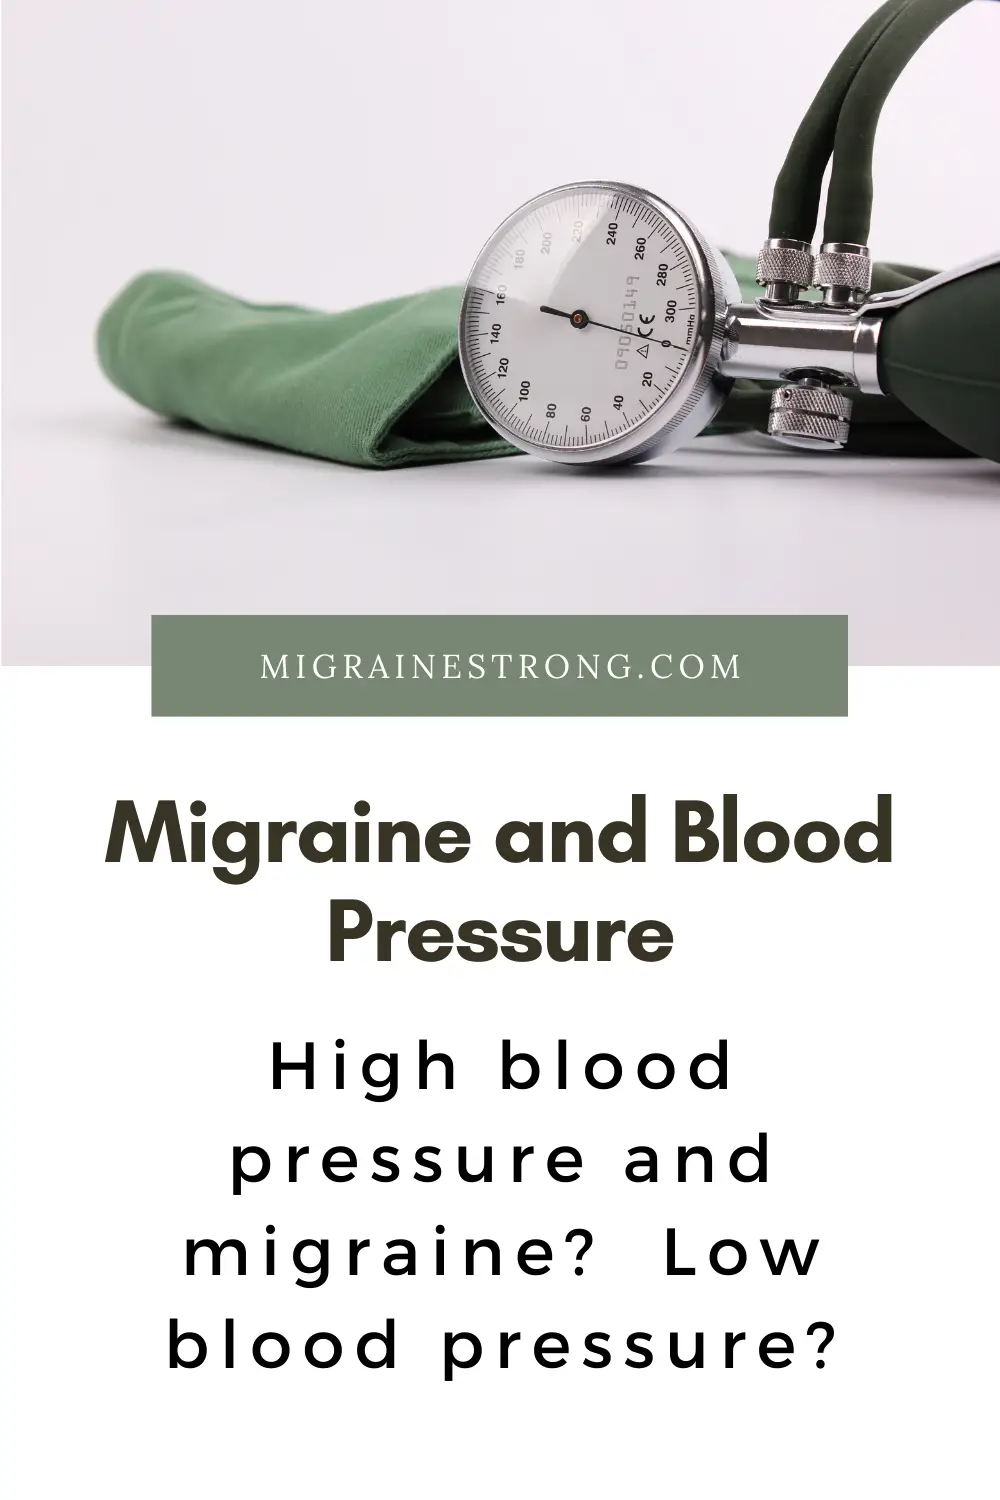 Migraine and Blood Pressure – Is There a Connection?